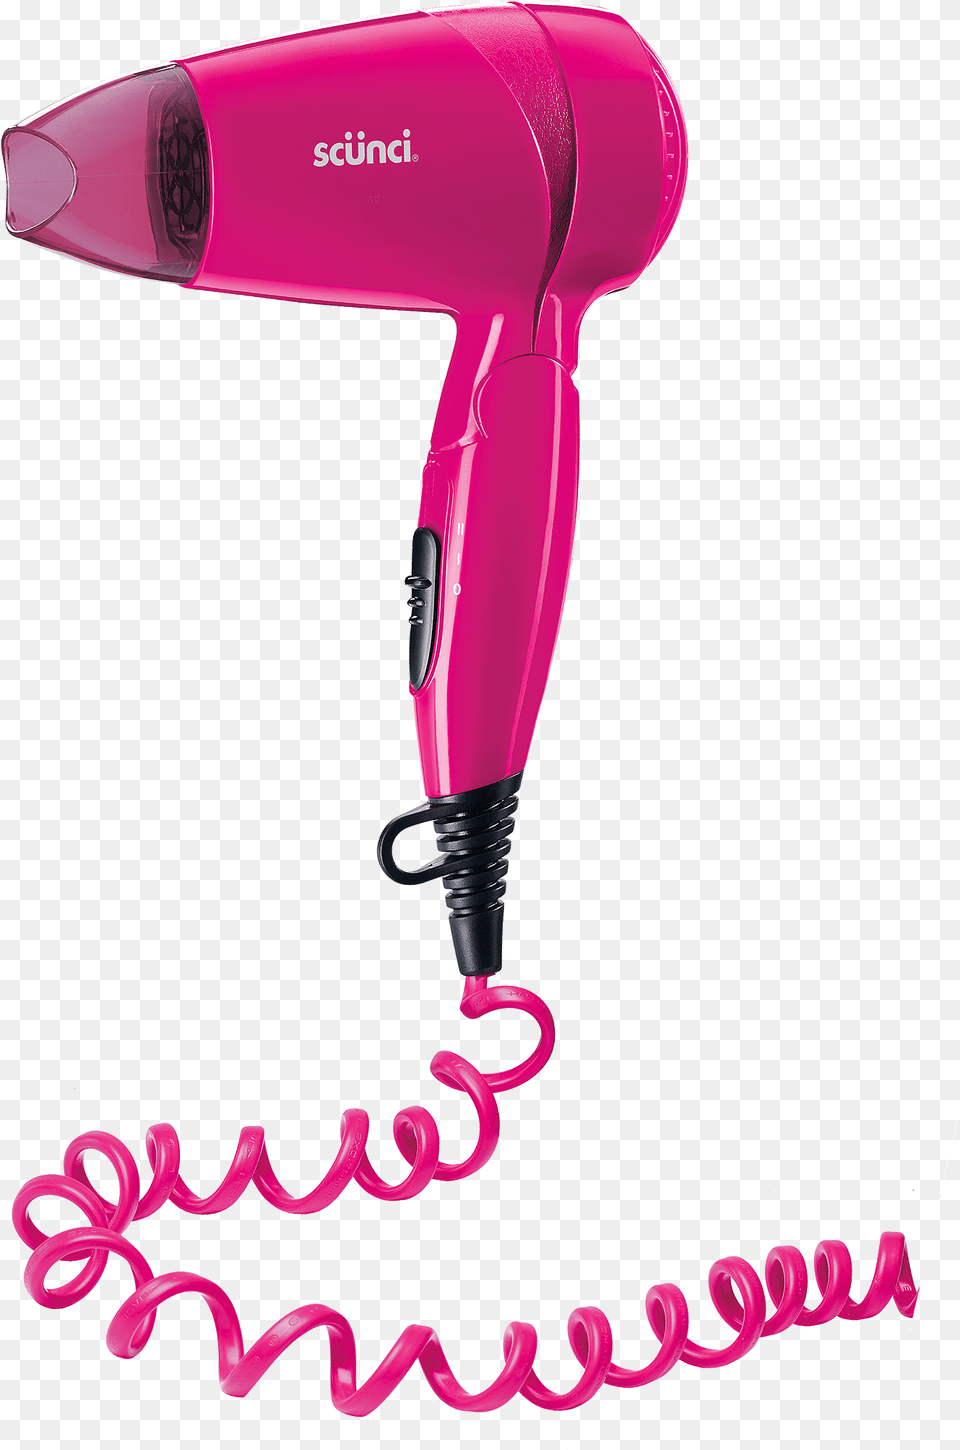 Curly Cord Compact Hair Dryer Blow Dryer With Long Cable, Appliance, Blow Dryer, Device, Electrical Device Png Image